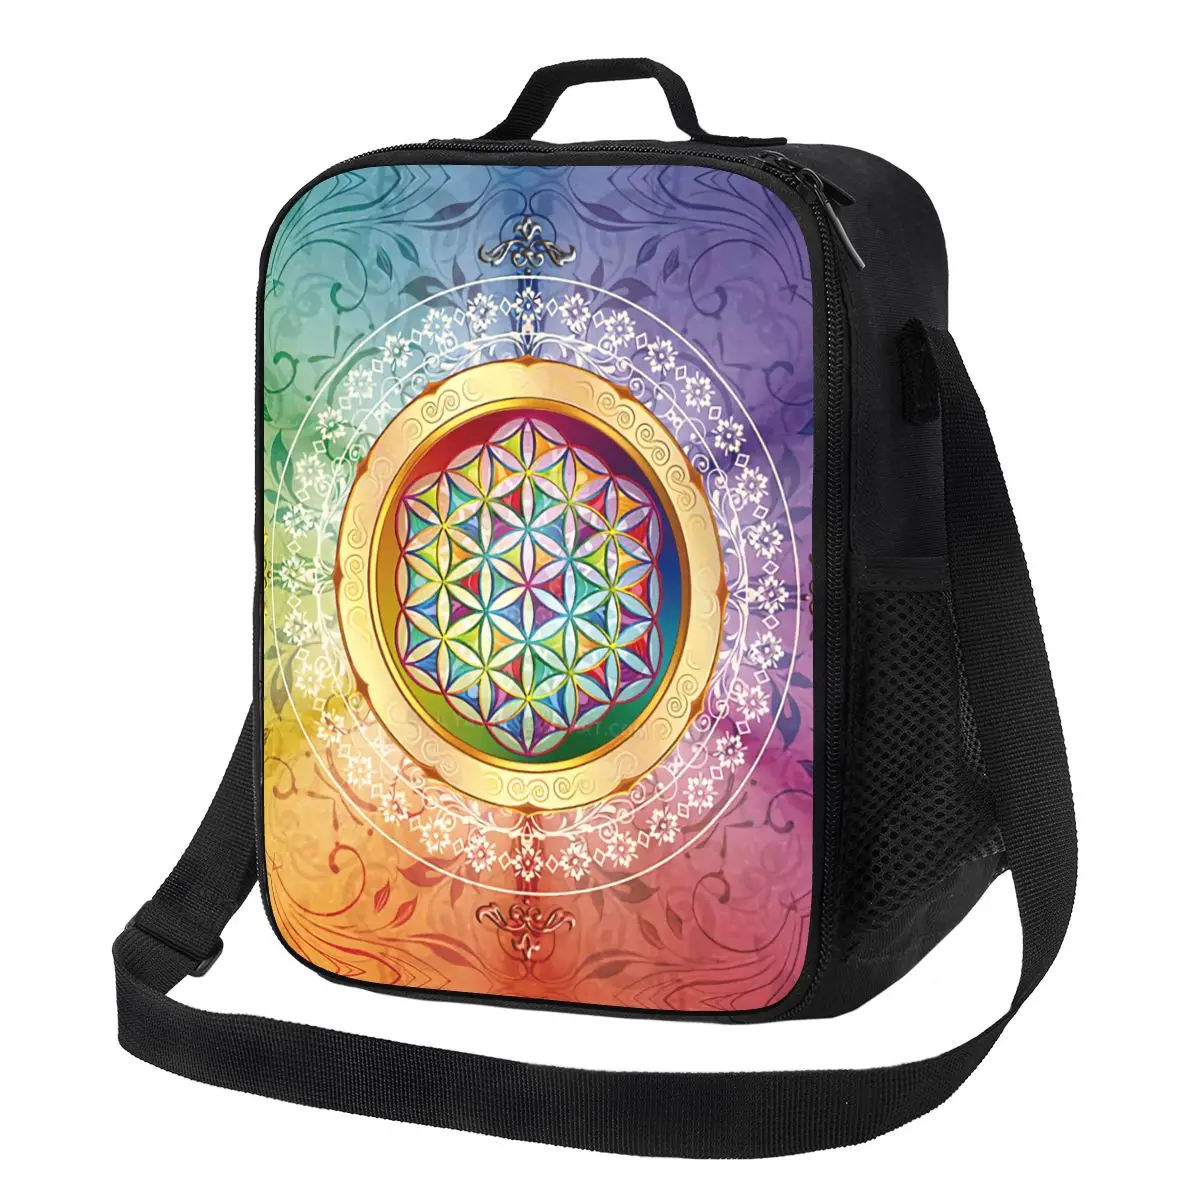 

Romantic Flower Of Life Insulated Lunch Bags for Sacred Geometry Portable Cooler Thermal Food Bento Box Outdoor Camping Travel